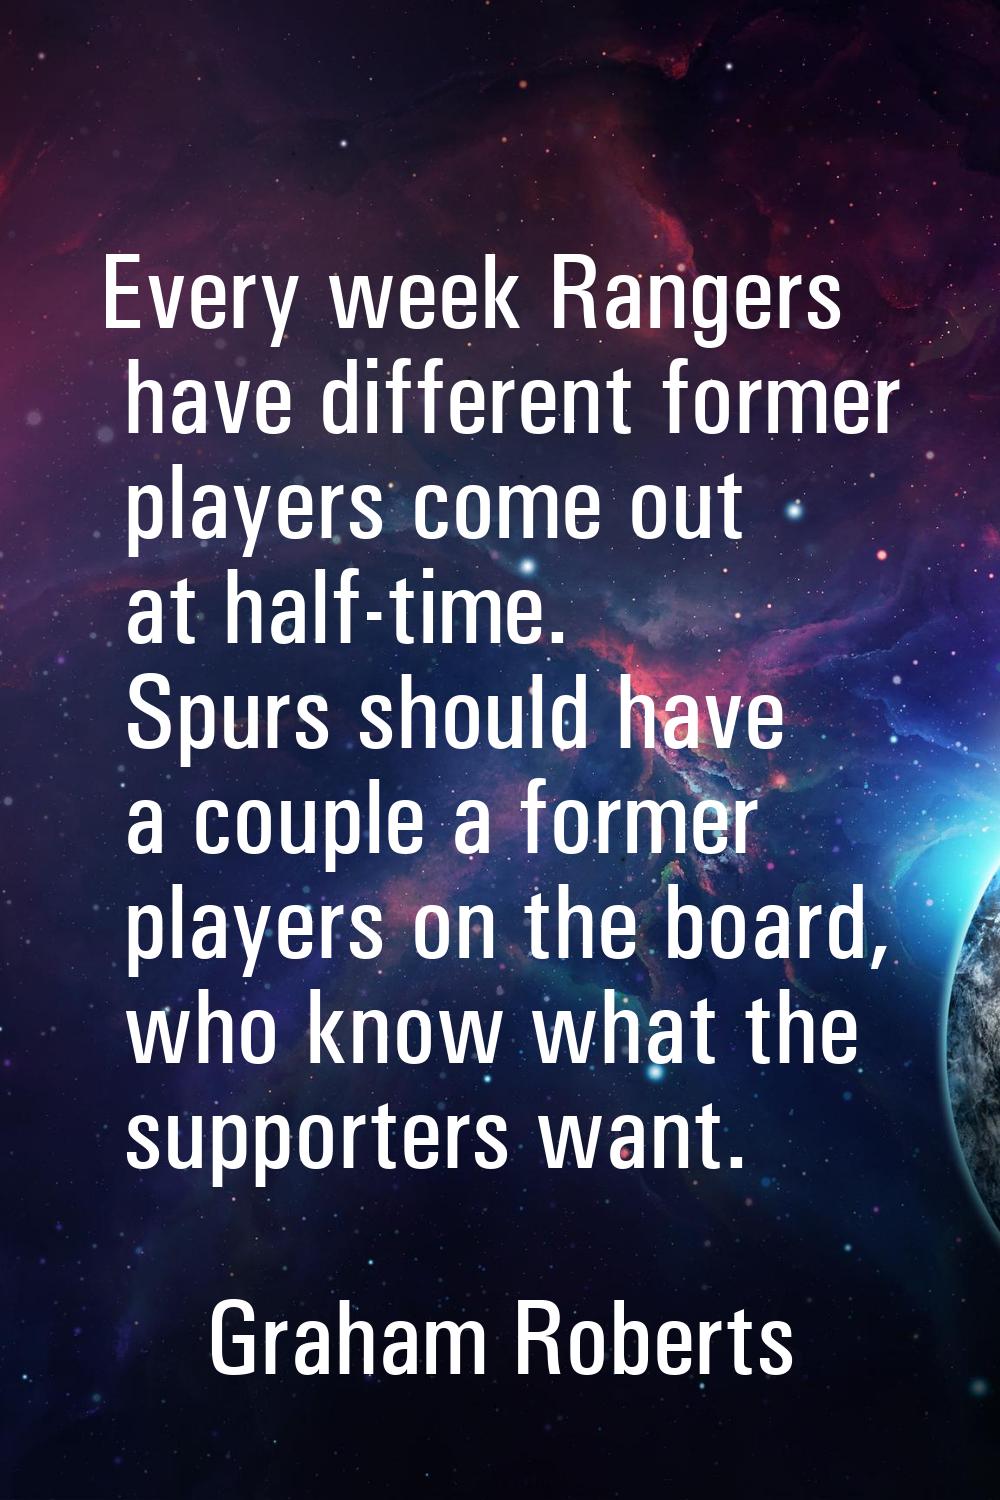 Every week Rangers have different former players come out at half-time. Spurs should have a couple 